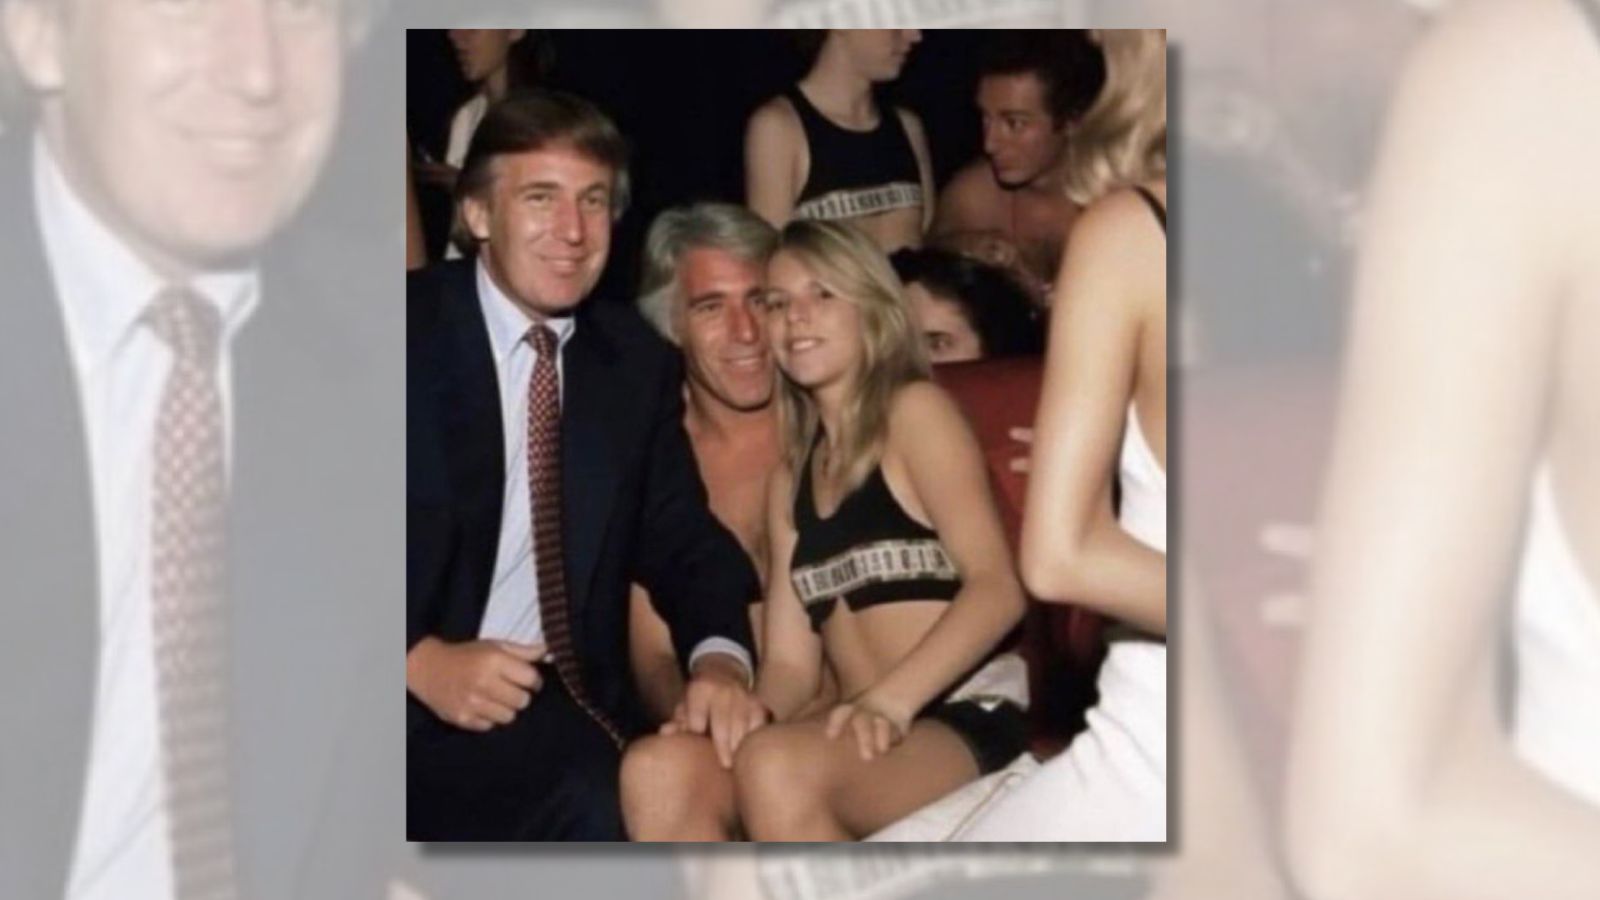 Here's the Story Behind That Bizarre Painting of Bill Clinton in a Blue  Dress Seen at Jeffrey Epstein's Home